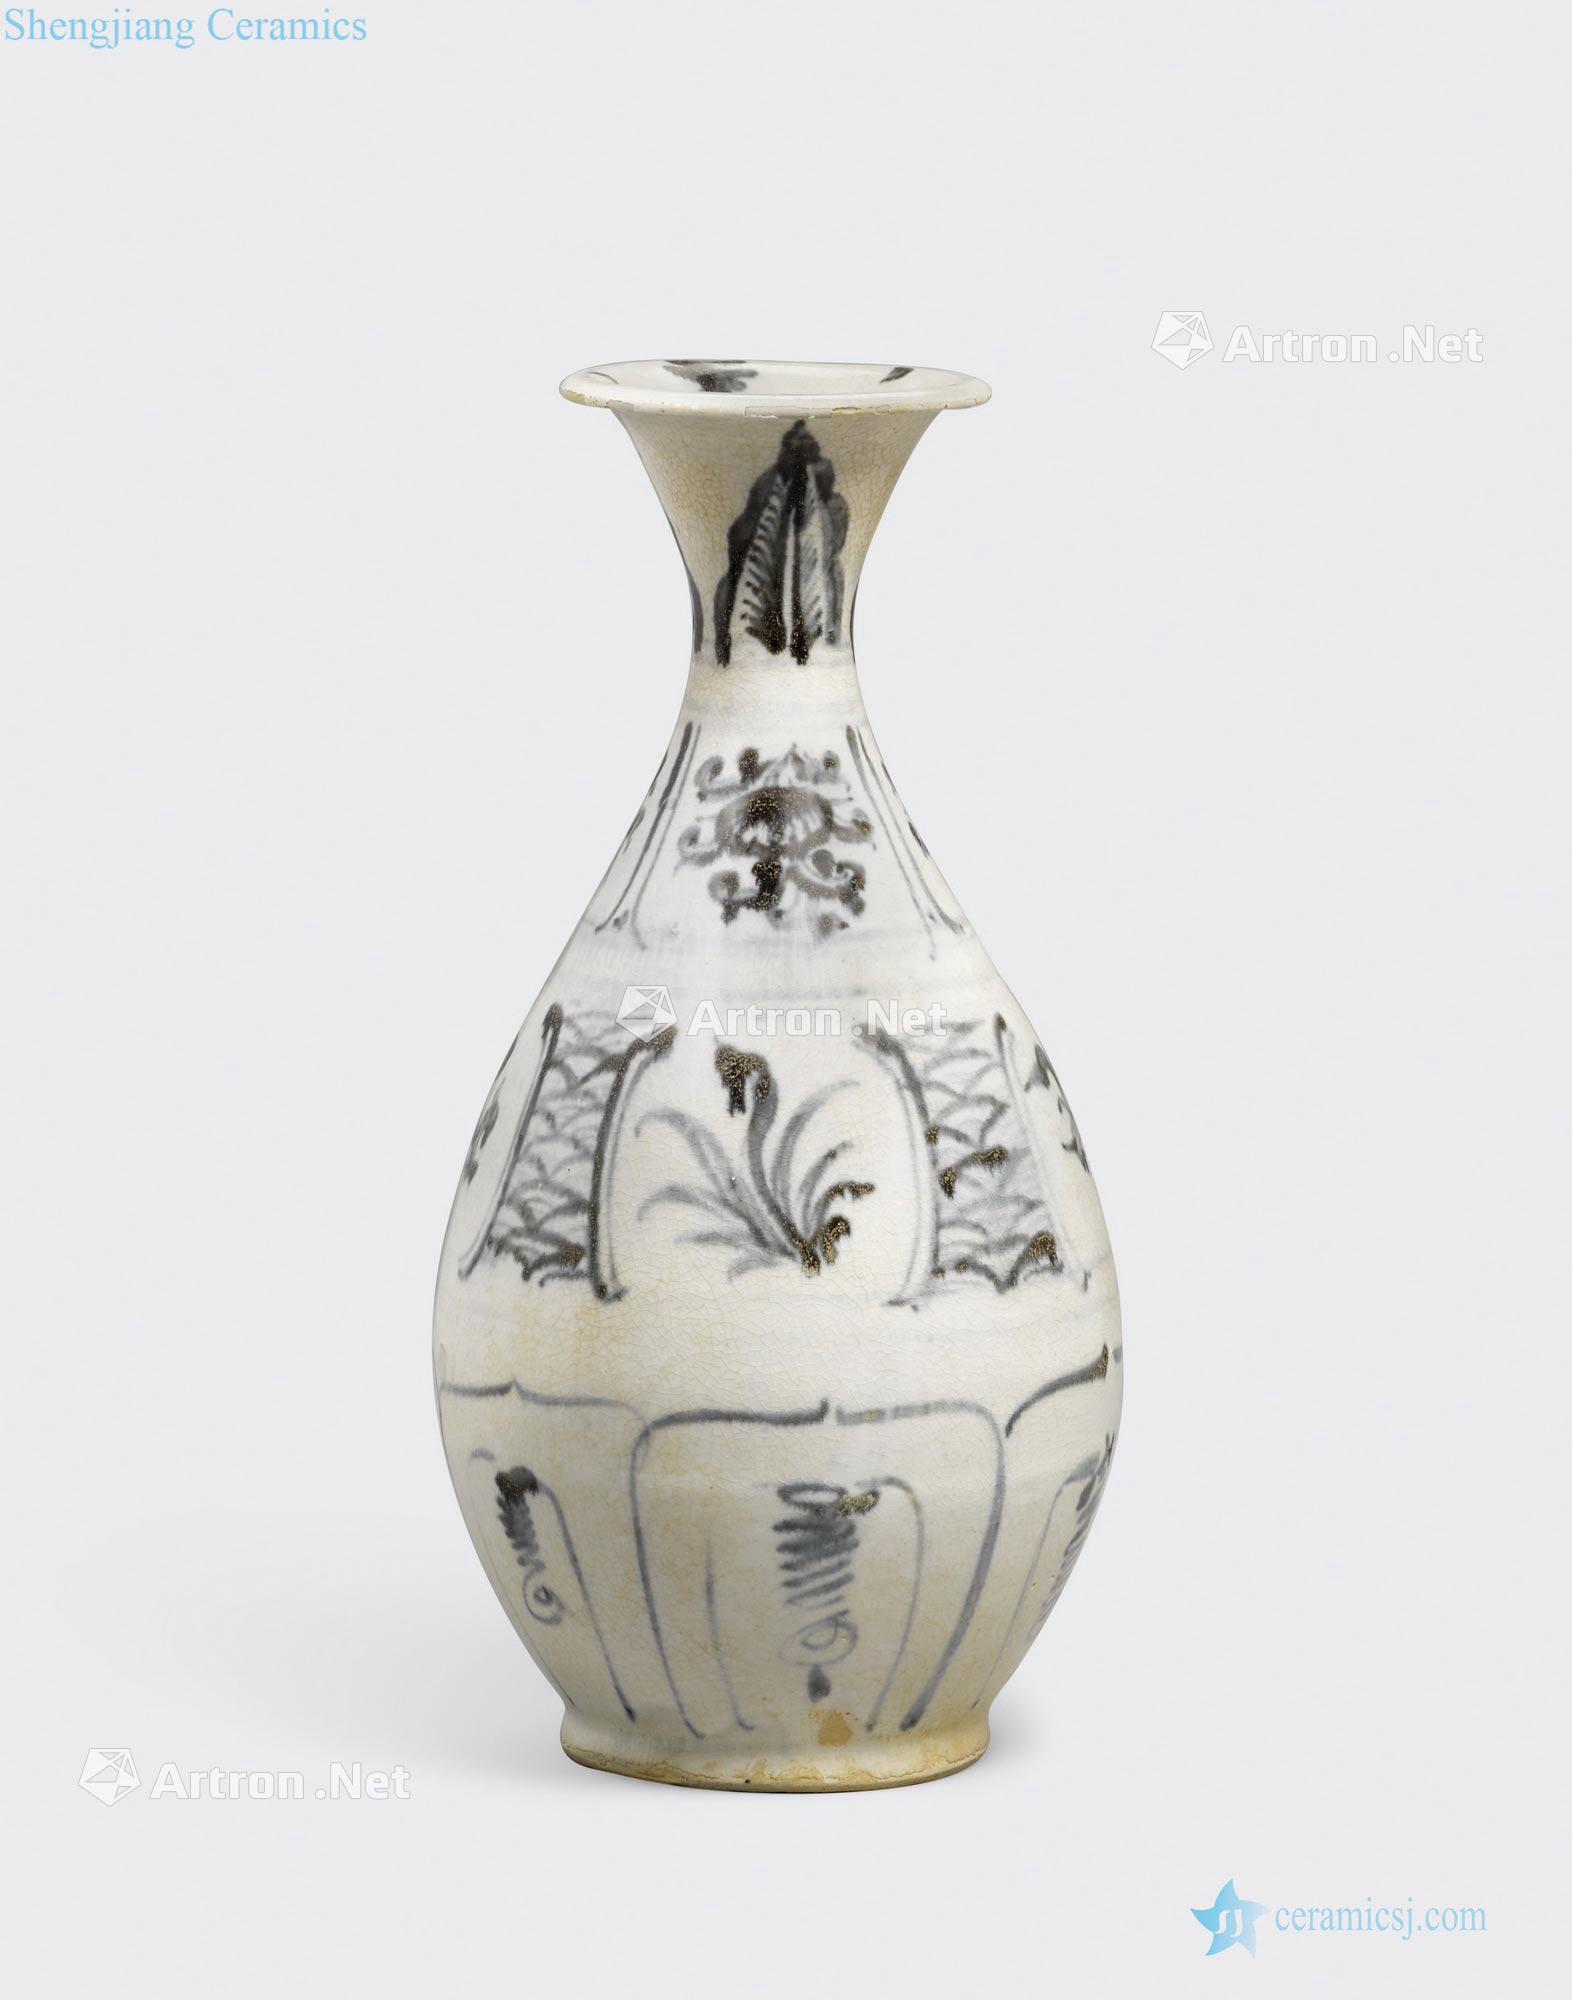 Le dynasty, 15 h/16 th century A BLUE AND WHITE BOTTLE, BINH TY BA